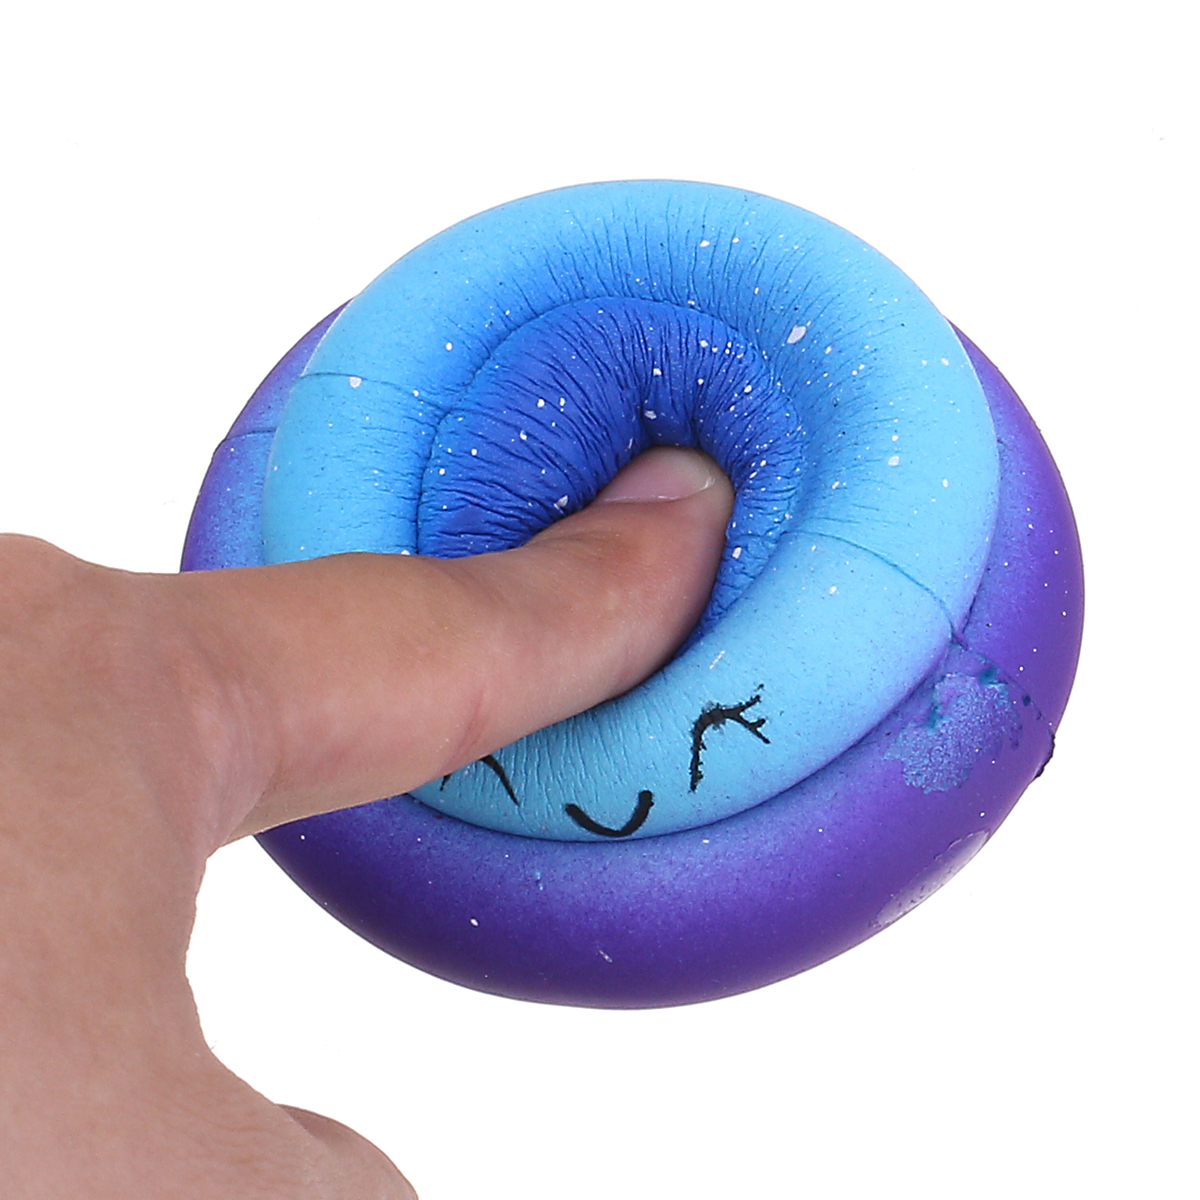 Squishy-Galaxy-Poo-Squishy-Hand-Pillow-65CM-Slow-Rising-With-Packaging-Collection-Gift-Decor-Toy-1311228-9